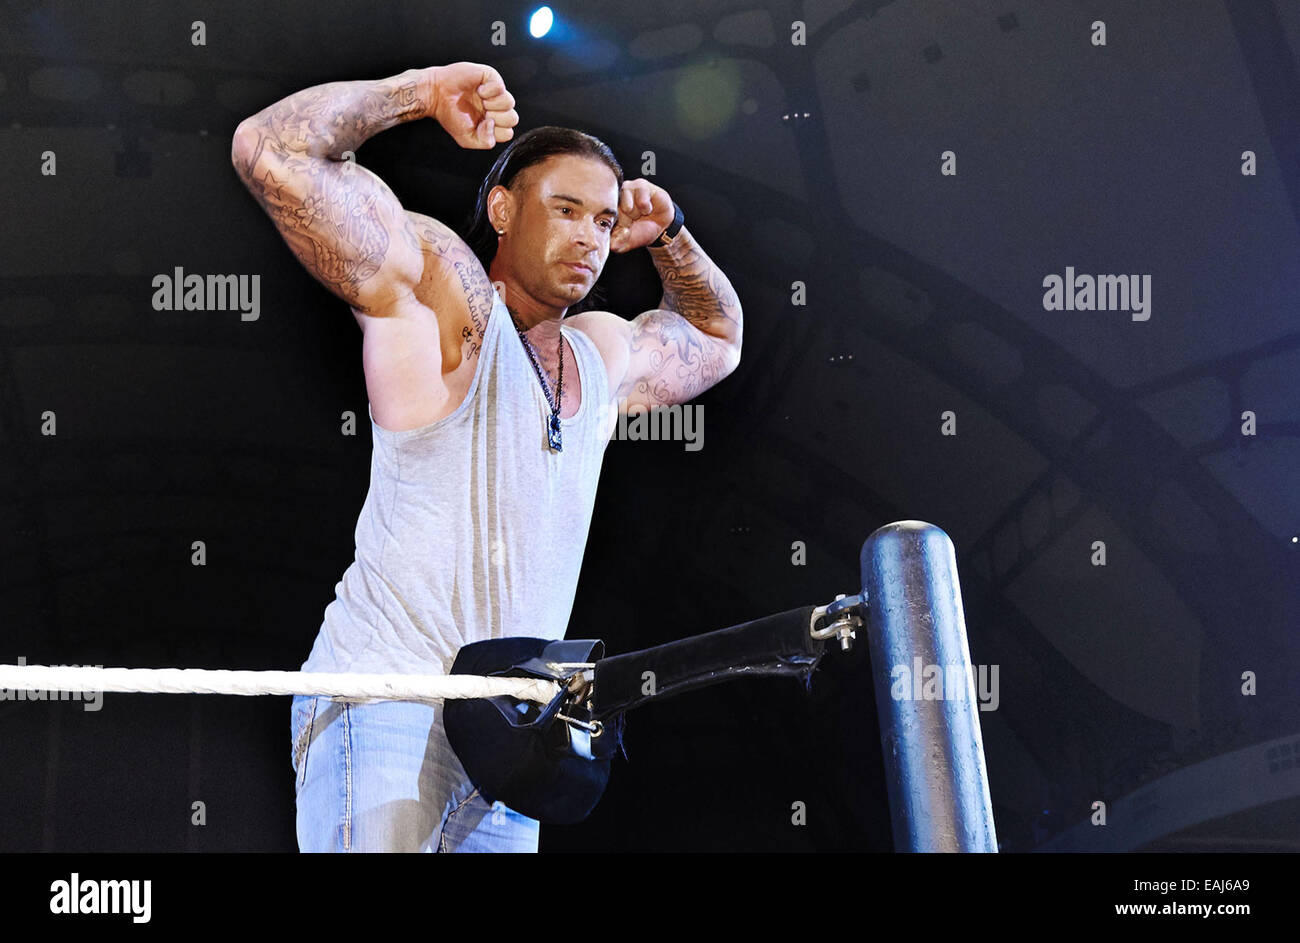 HANDOUT - Former national goal keeper Tim Wiese poses during a wrestling event in Frankfurt/Main, Germany, 15 November 2014. Photo: Affonso Gavinha/WWE (ATTENTION: IMAGE FOR EDITORIAL USE ONLY BY MENTIONTIONING THE SOURCE: Affonso Gavinha/WWE) EDITORIAL USE ONLY Stock Photo